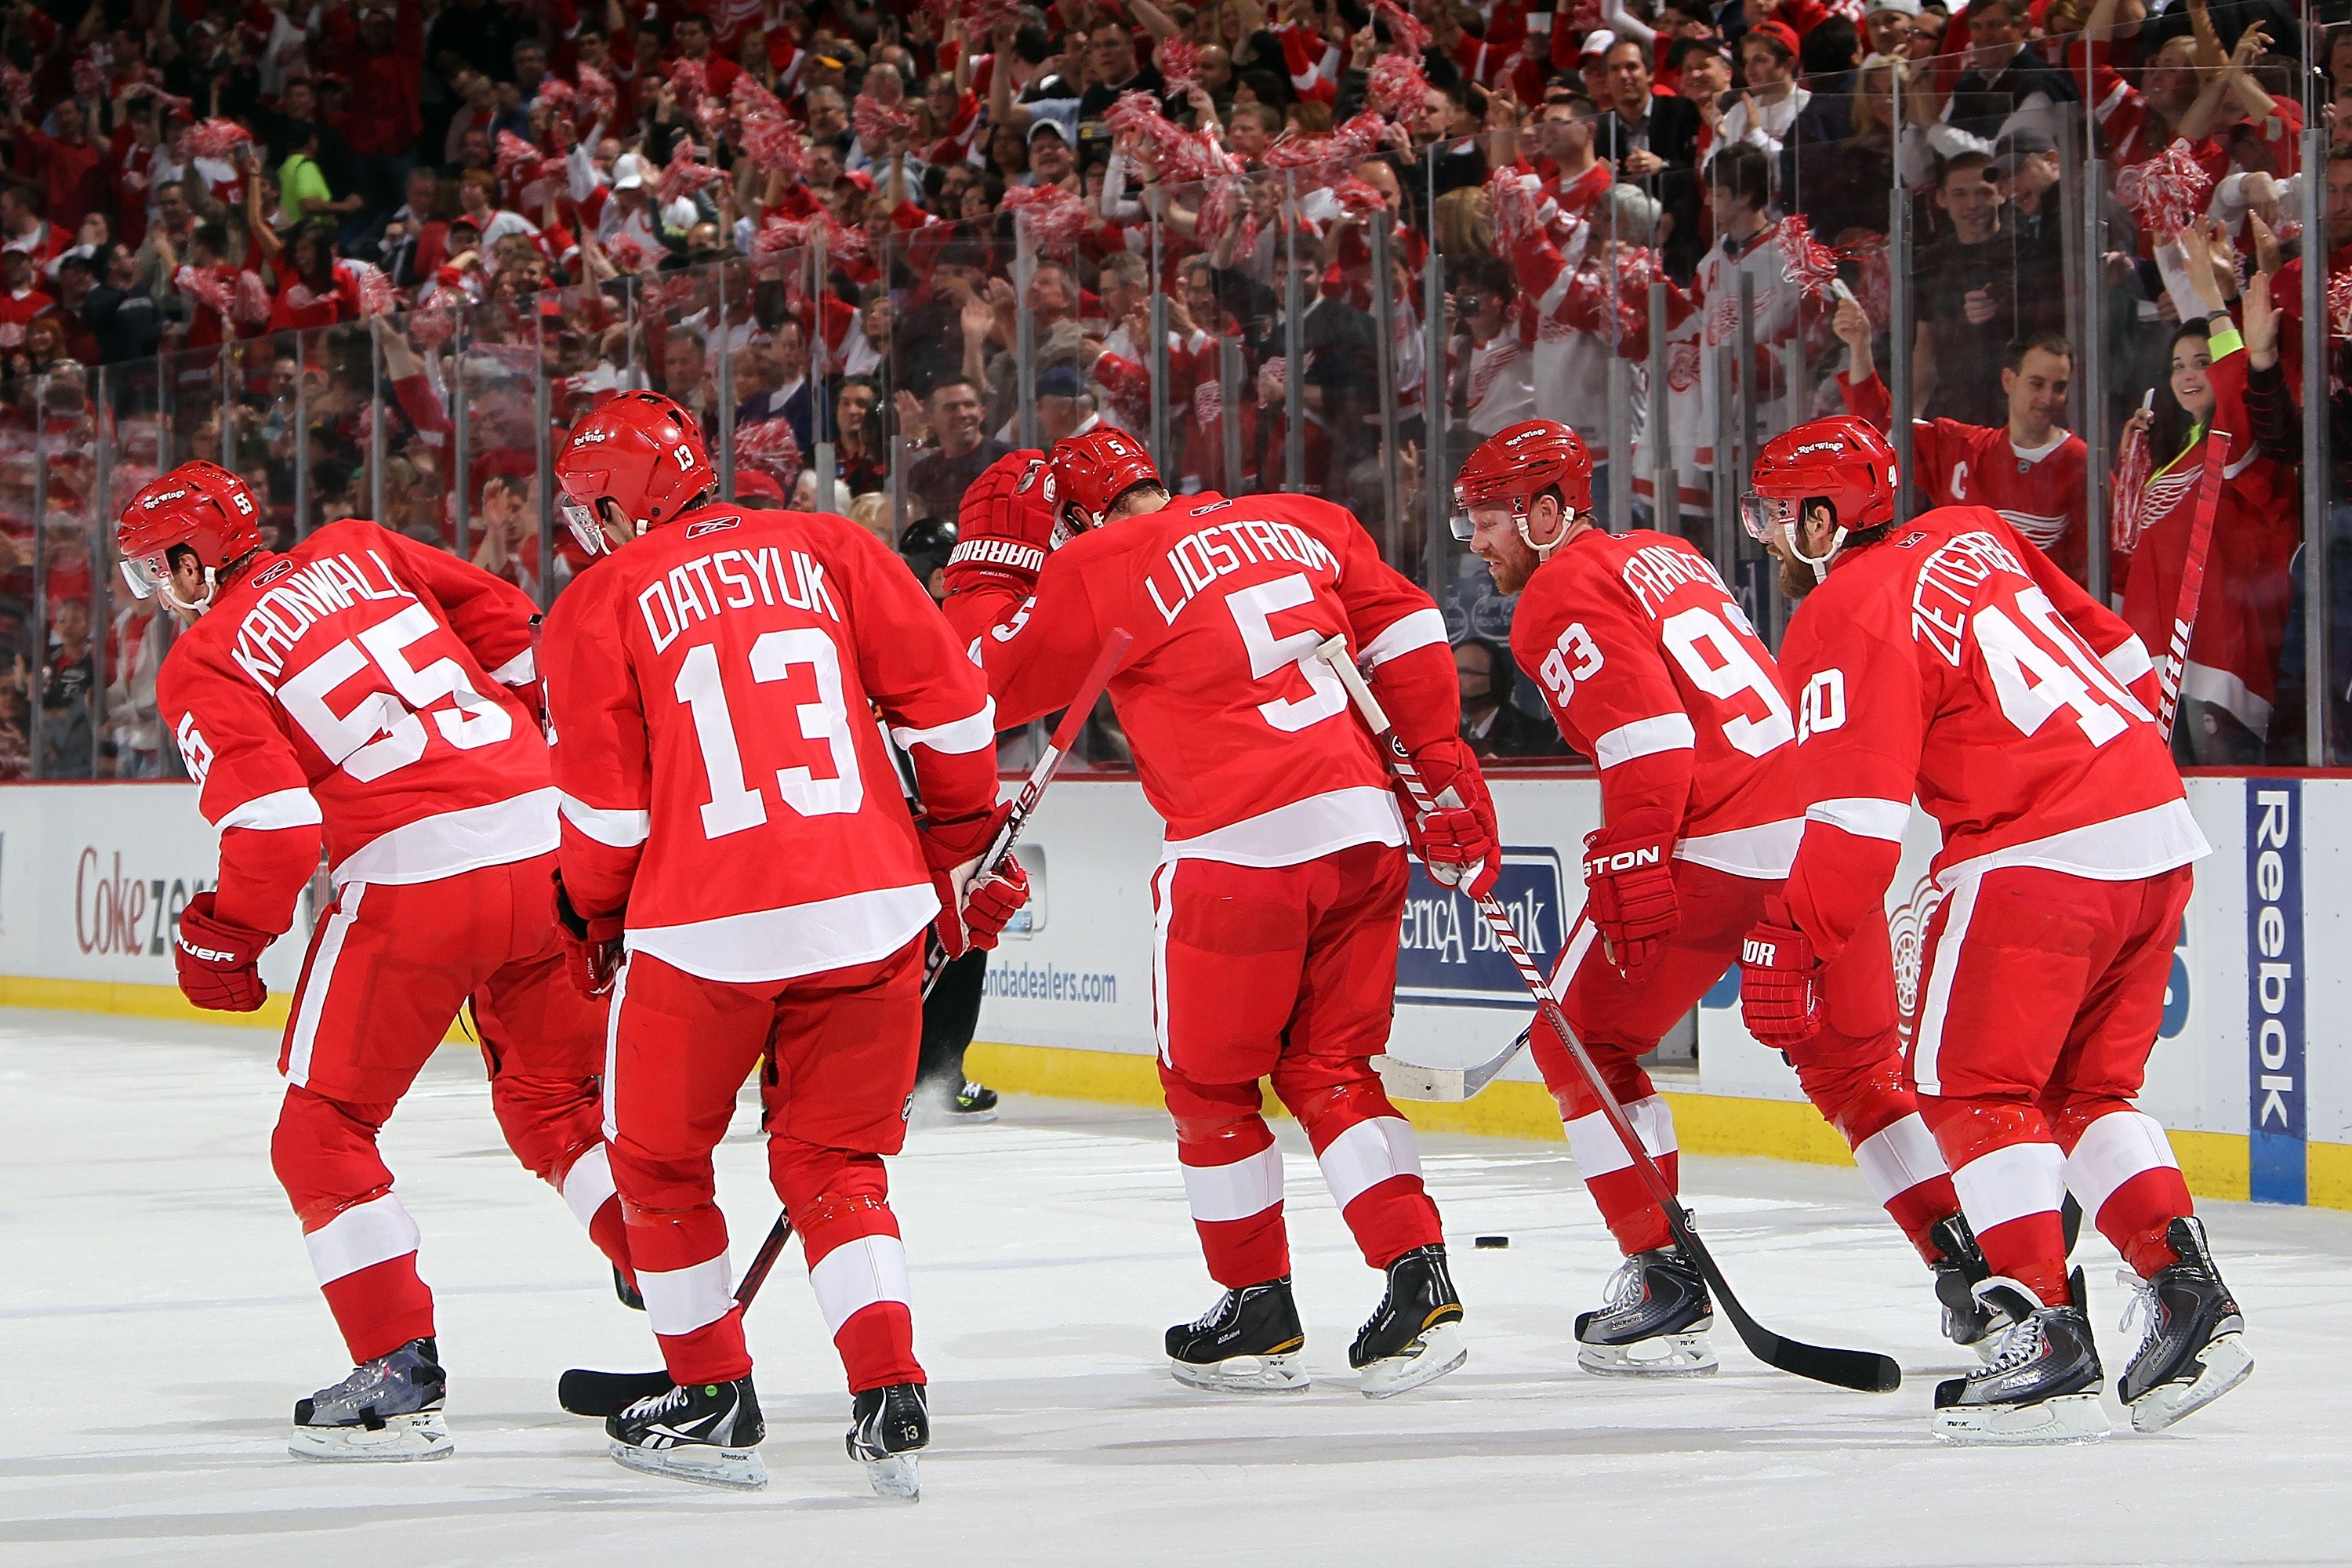 Detroit Red Wings Wallpaper Image Photo Picture Background